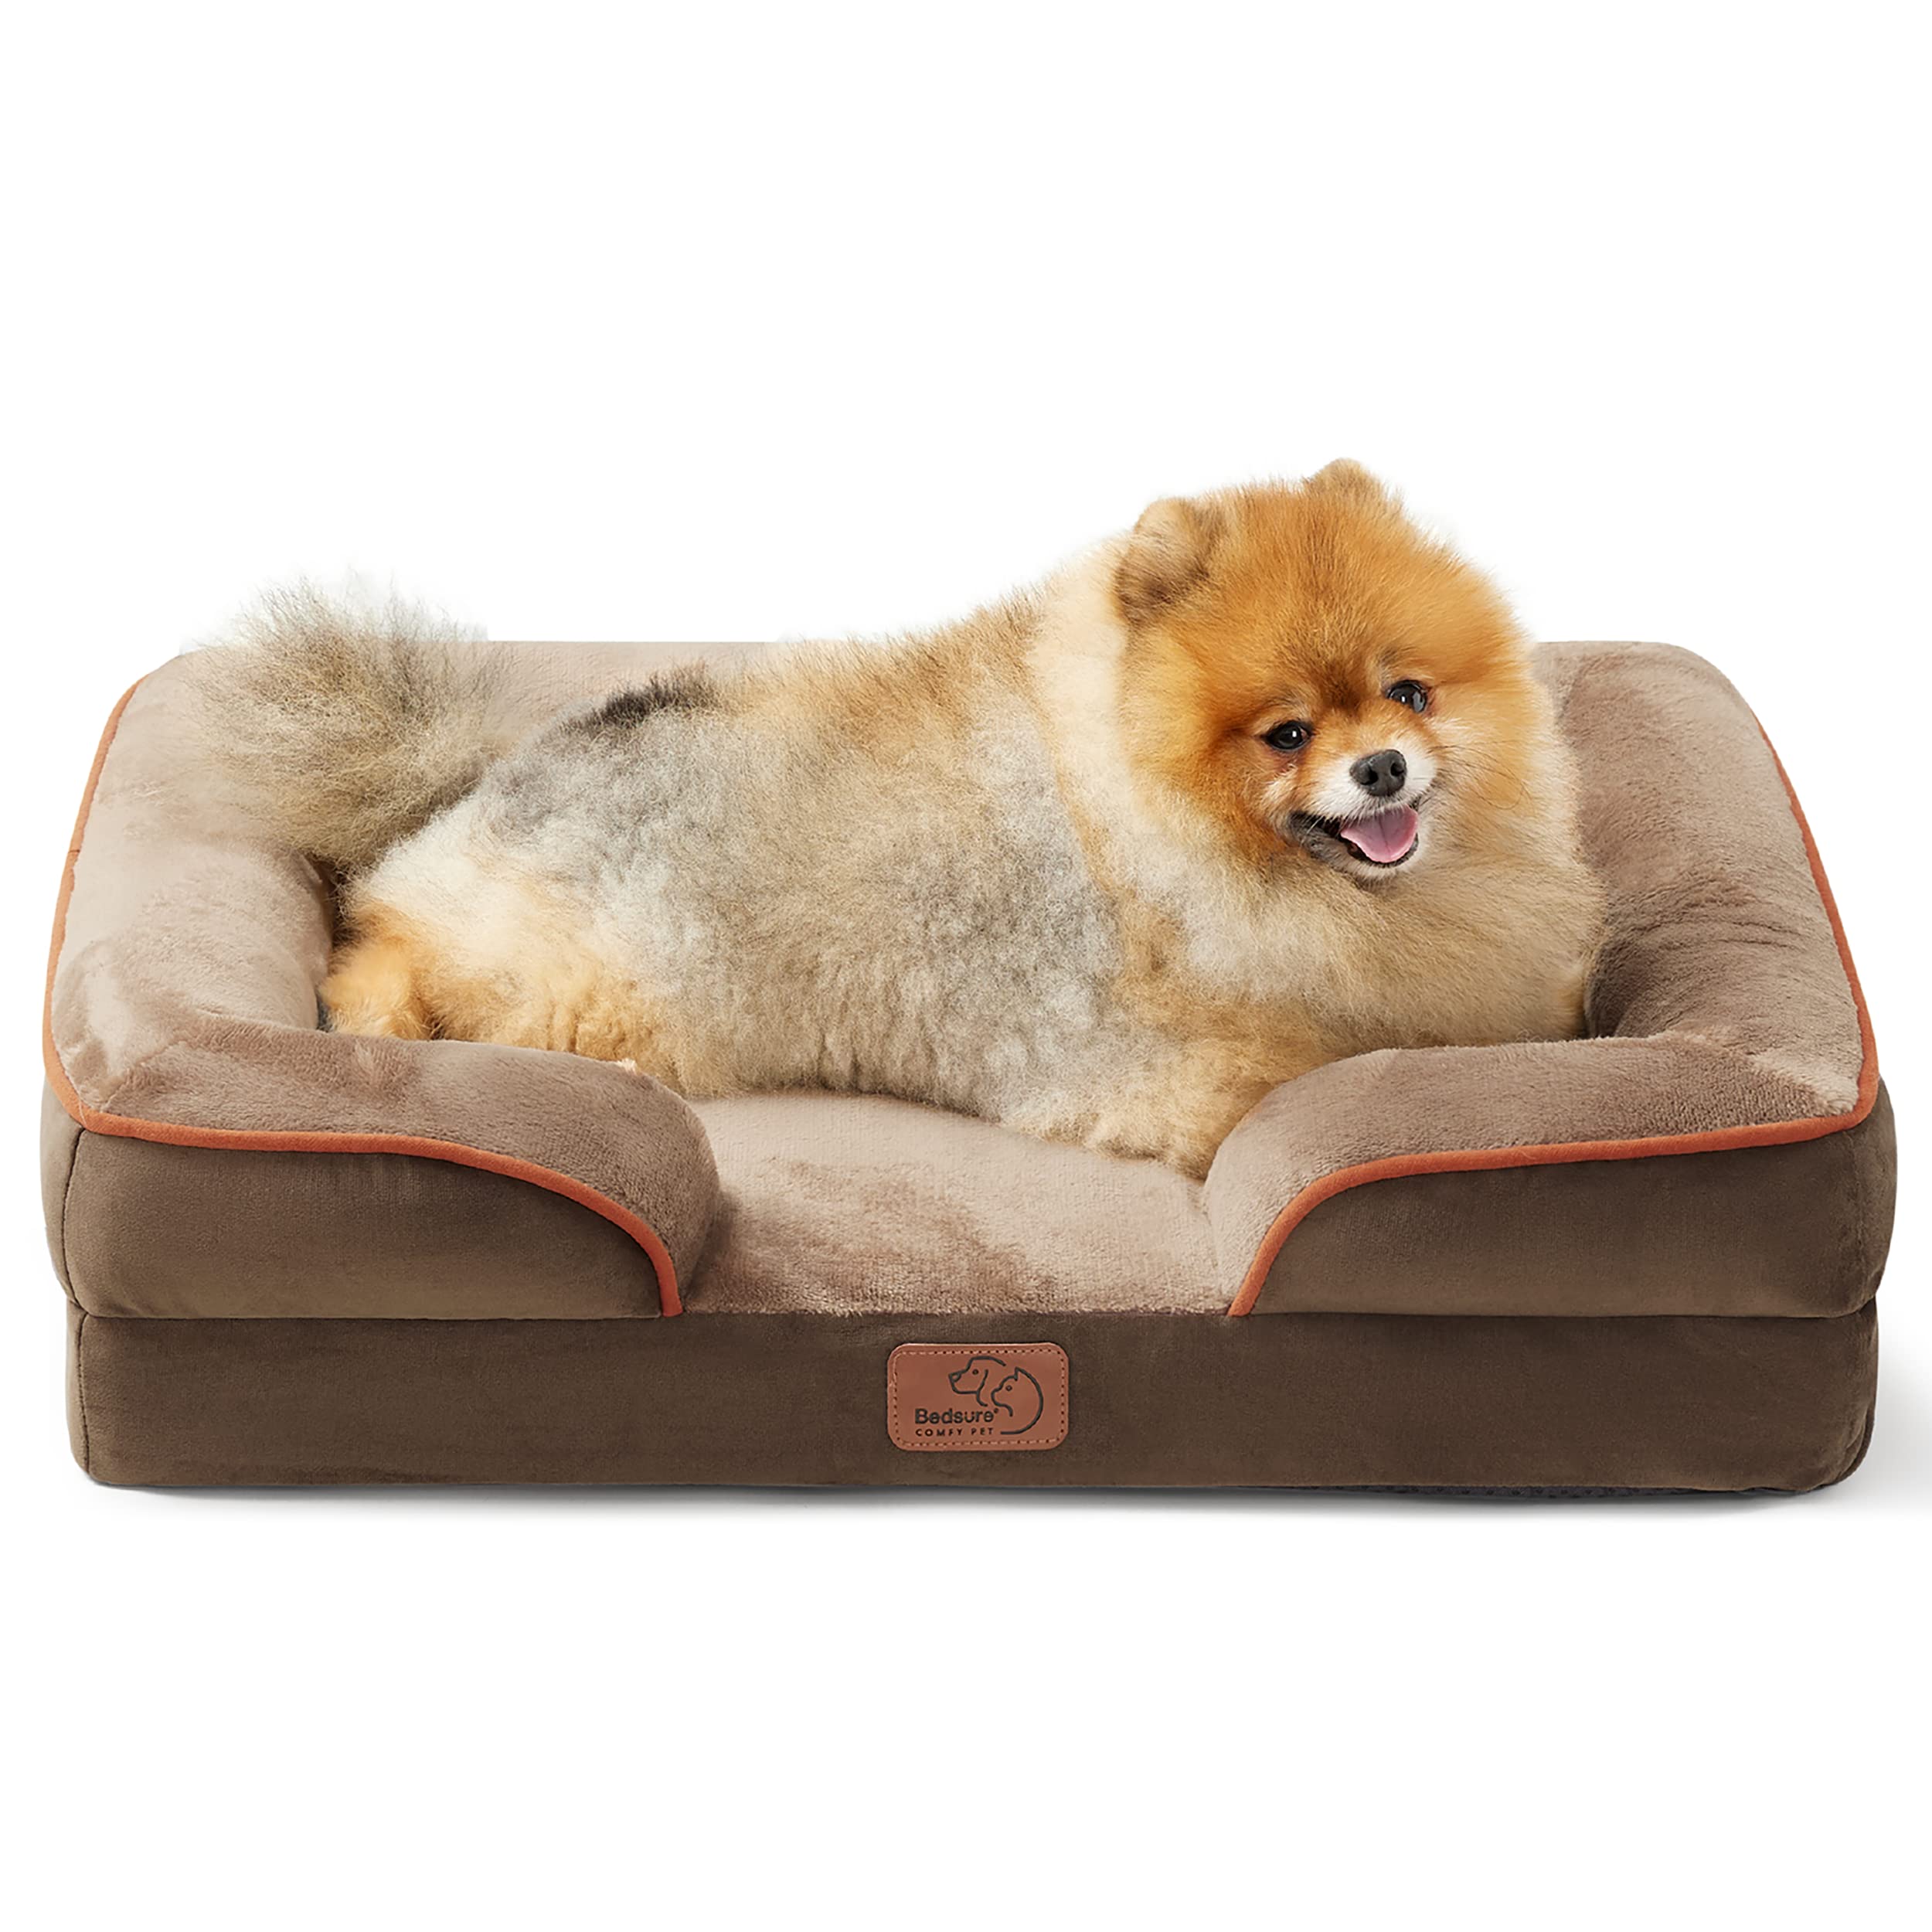 BEDSURE Small Orthopedic Dog Bed Bolster Dog Beds for Small Dogs - Foam Sofa with Removable Washable cover Waterproof Lining and